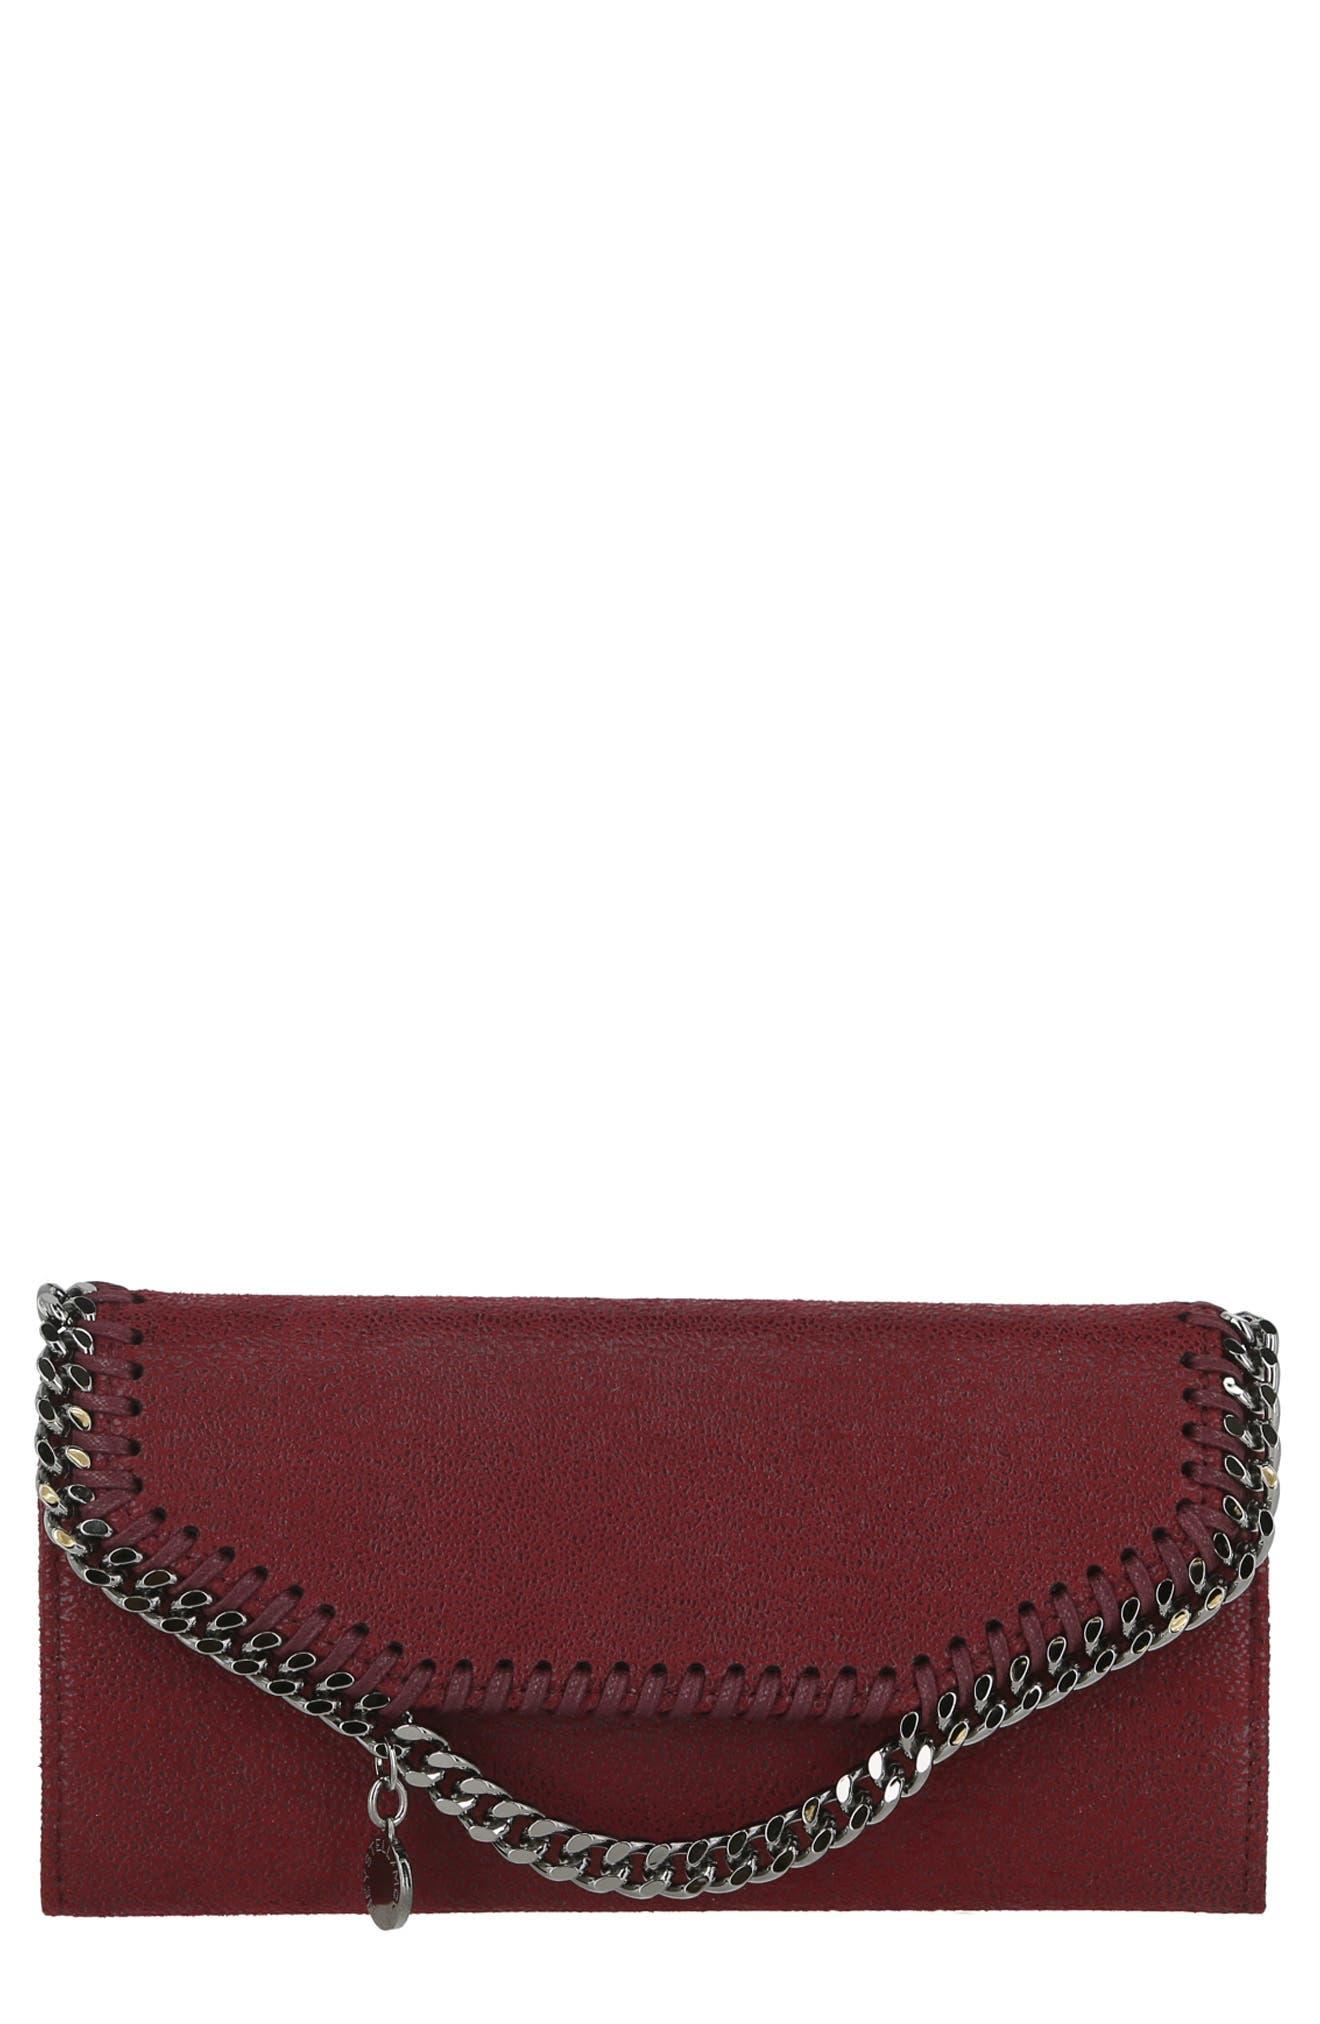 Stella McCartney Falabella Faux Leather Flap Wallet in Red | Lyst